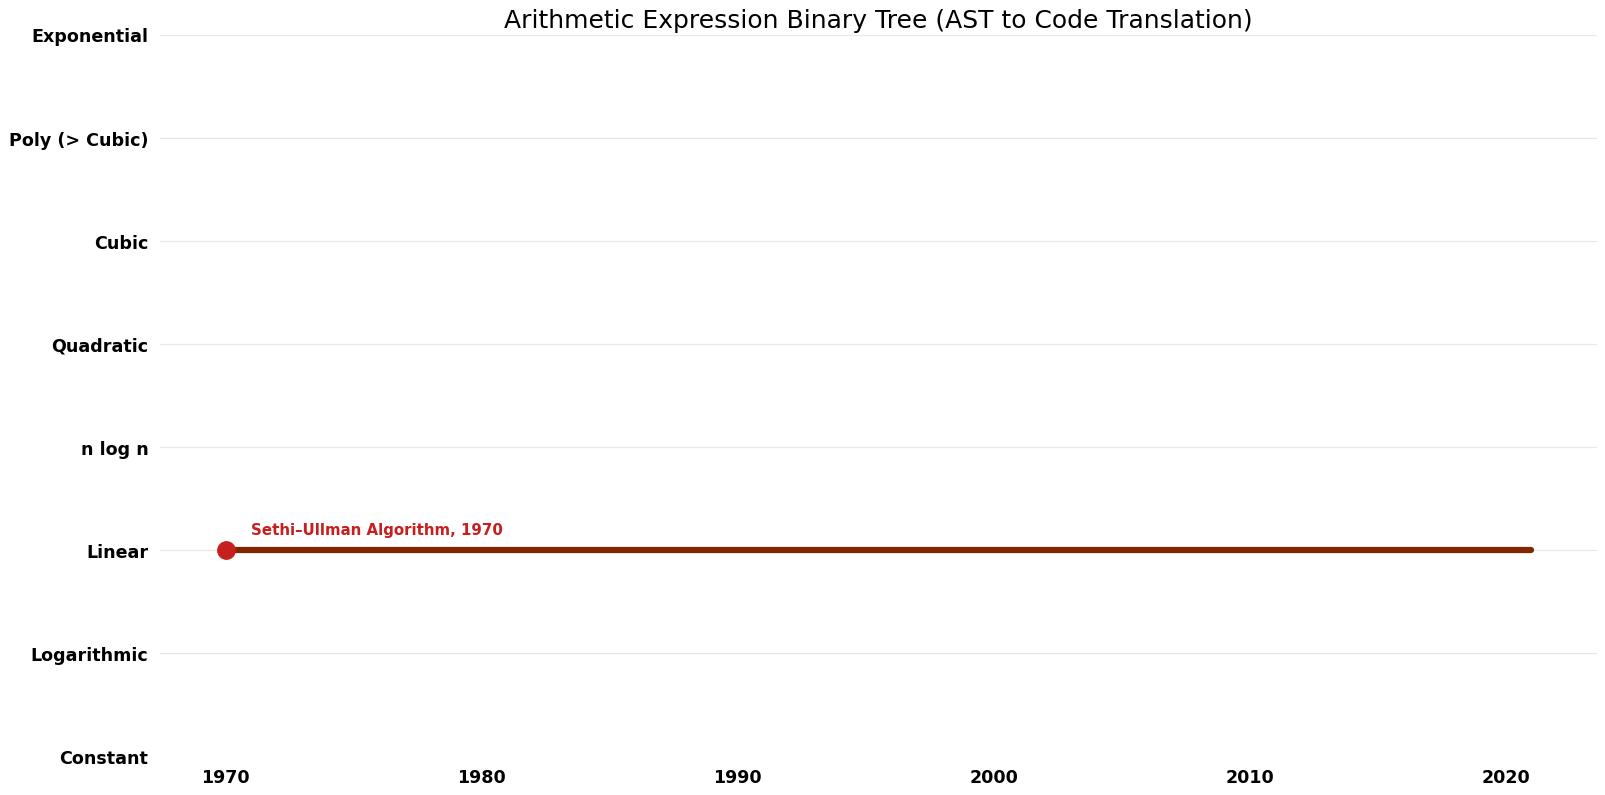 File:AST to Code Translation - Arithmetic Expression Binary Tree - Time.png